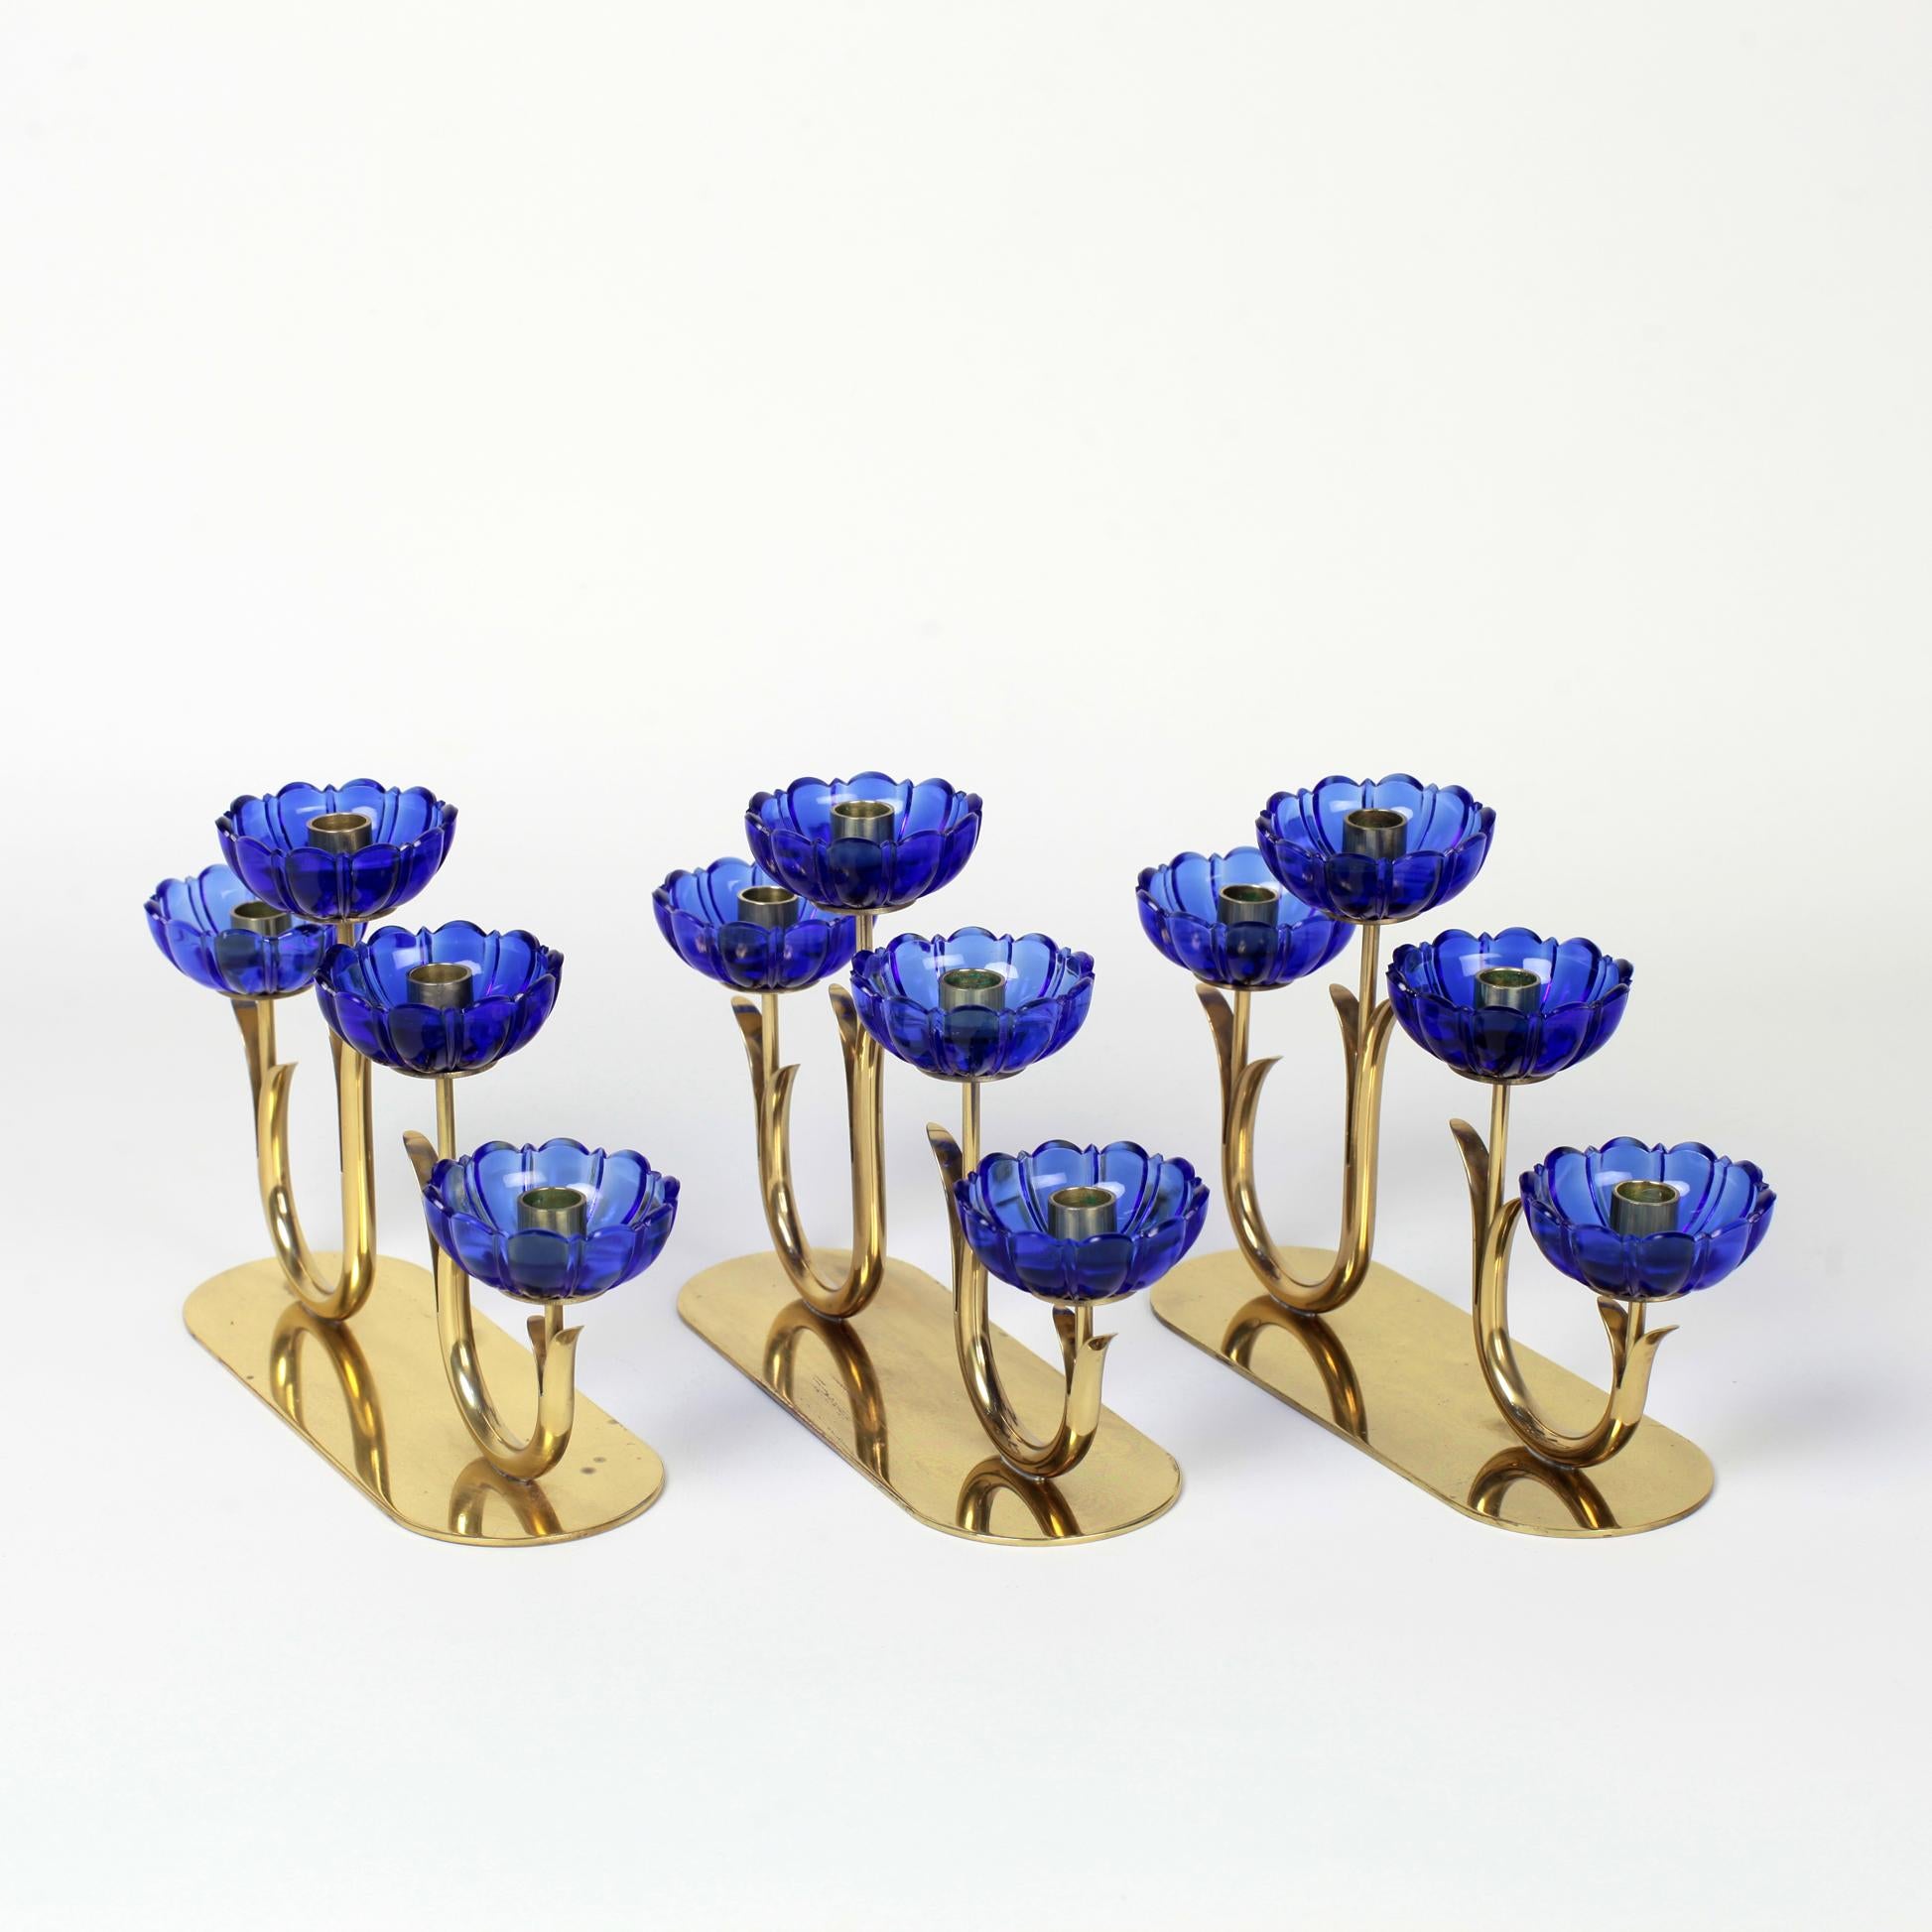 Beautiful set of 3 Gunnar Ander candleholder for Ystad Metall, Sweden
Delicate blue glass flowers and patinated gold-plated brass stems.